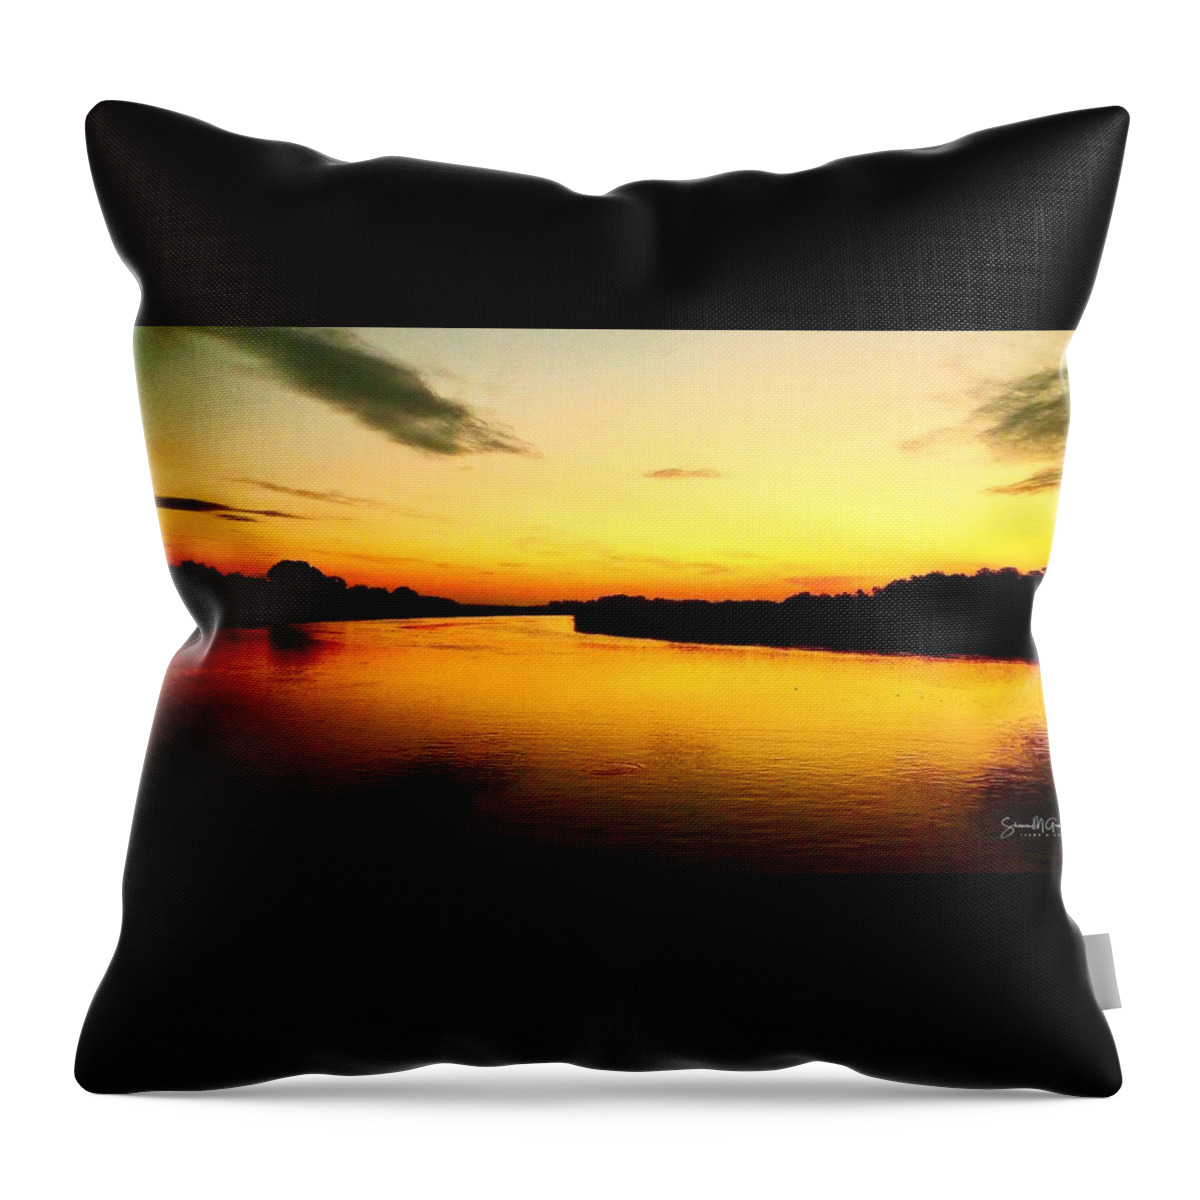 Water Throw Pillow featuring the photograph The Golden Reflection by Shawn M Greener